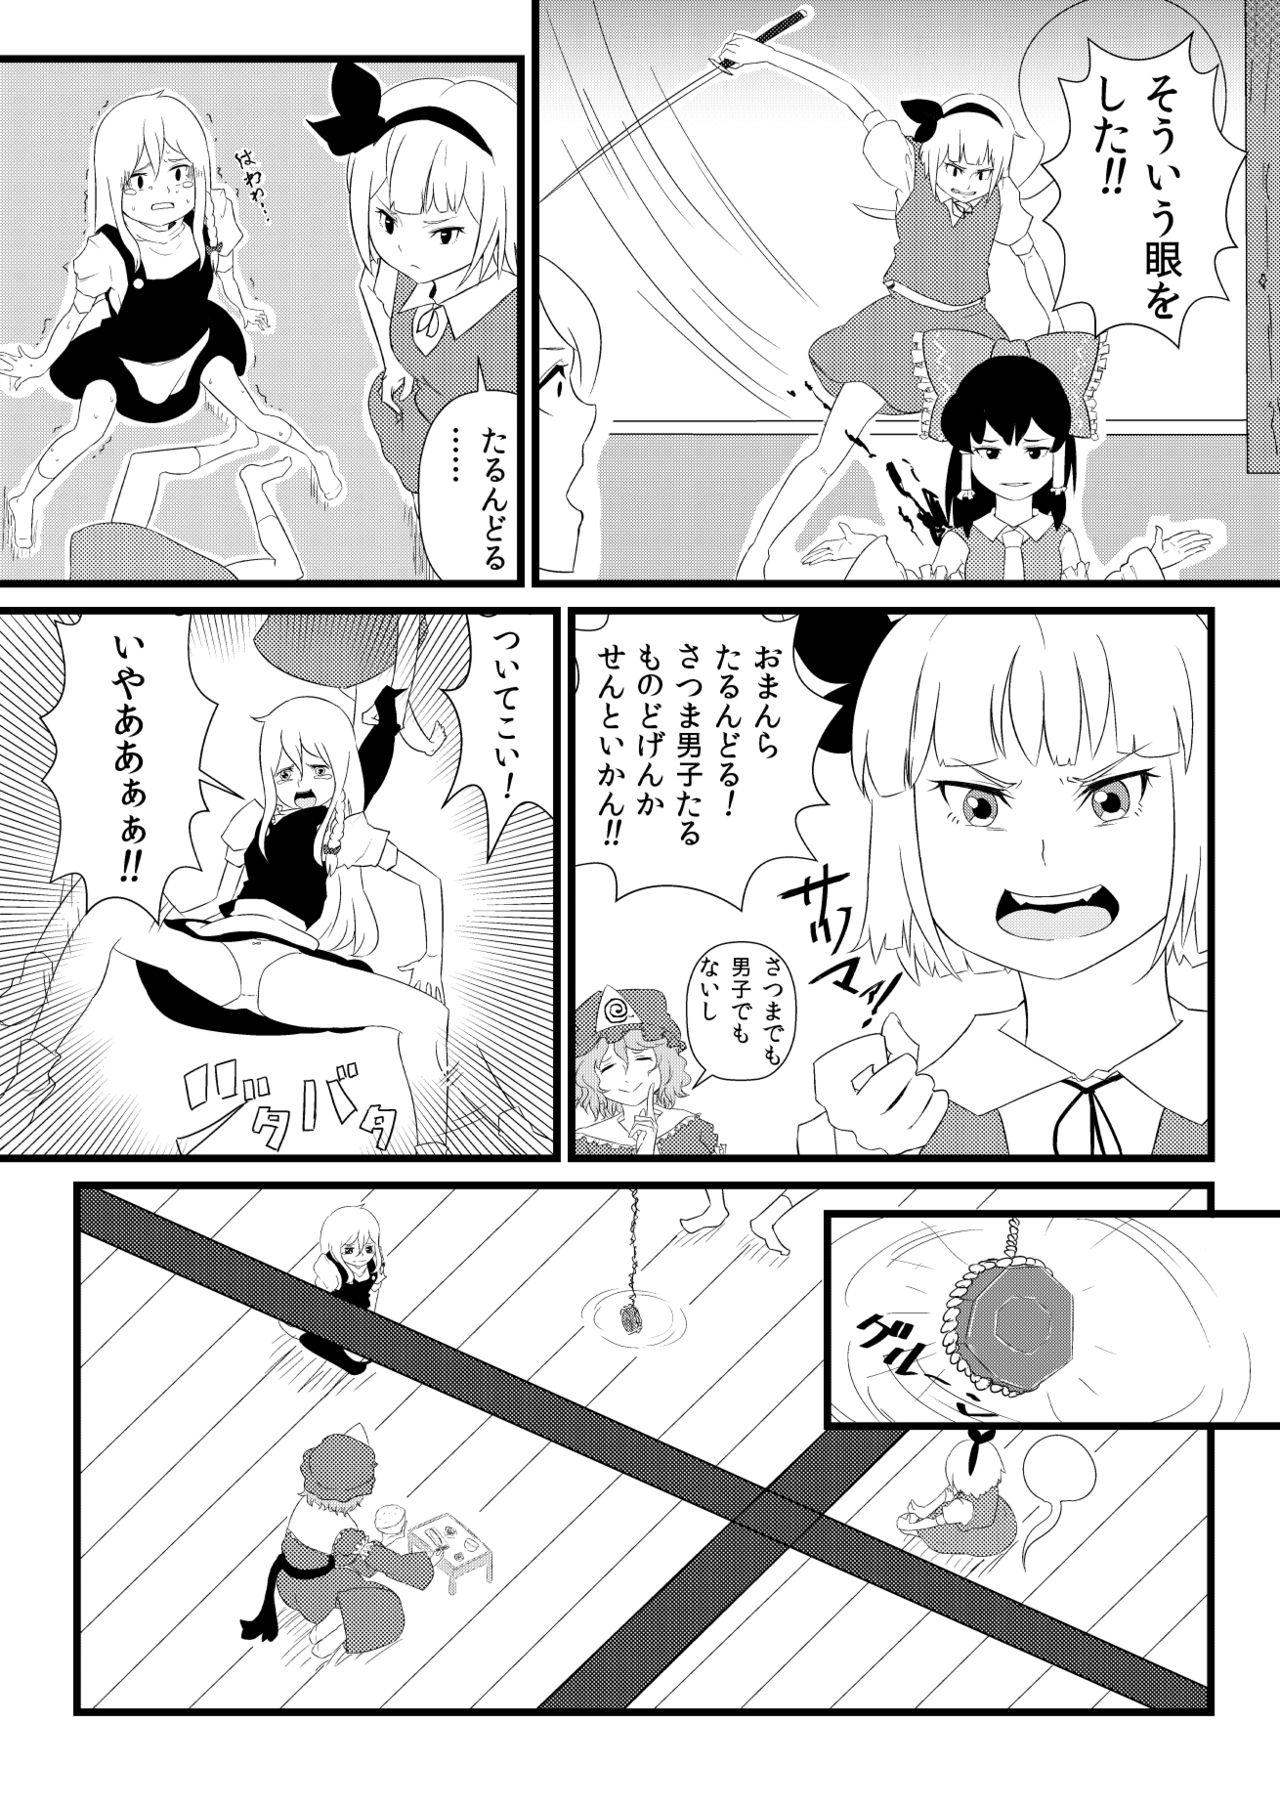 Missionary Position Porn 東方板としあき合同誌5 - Touhou project Tongue - Page 3